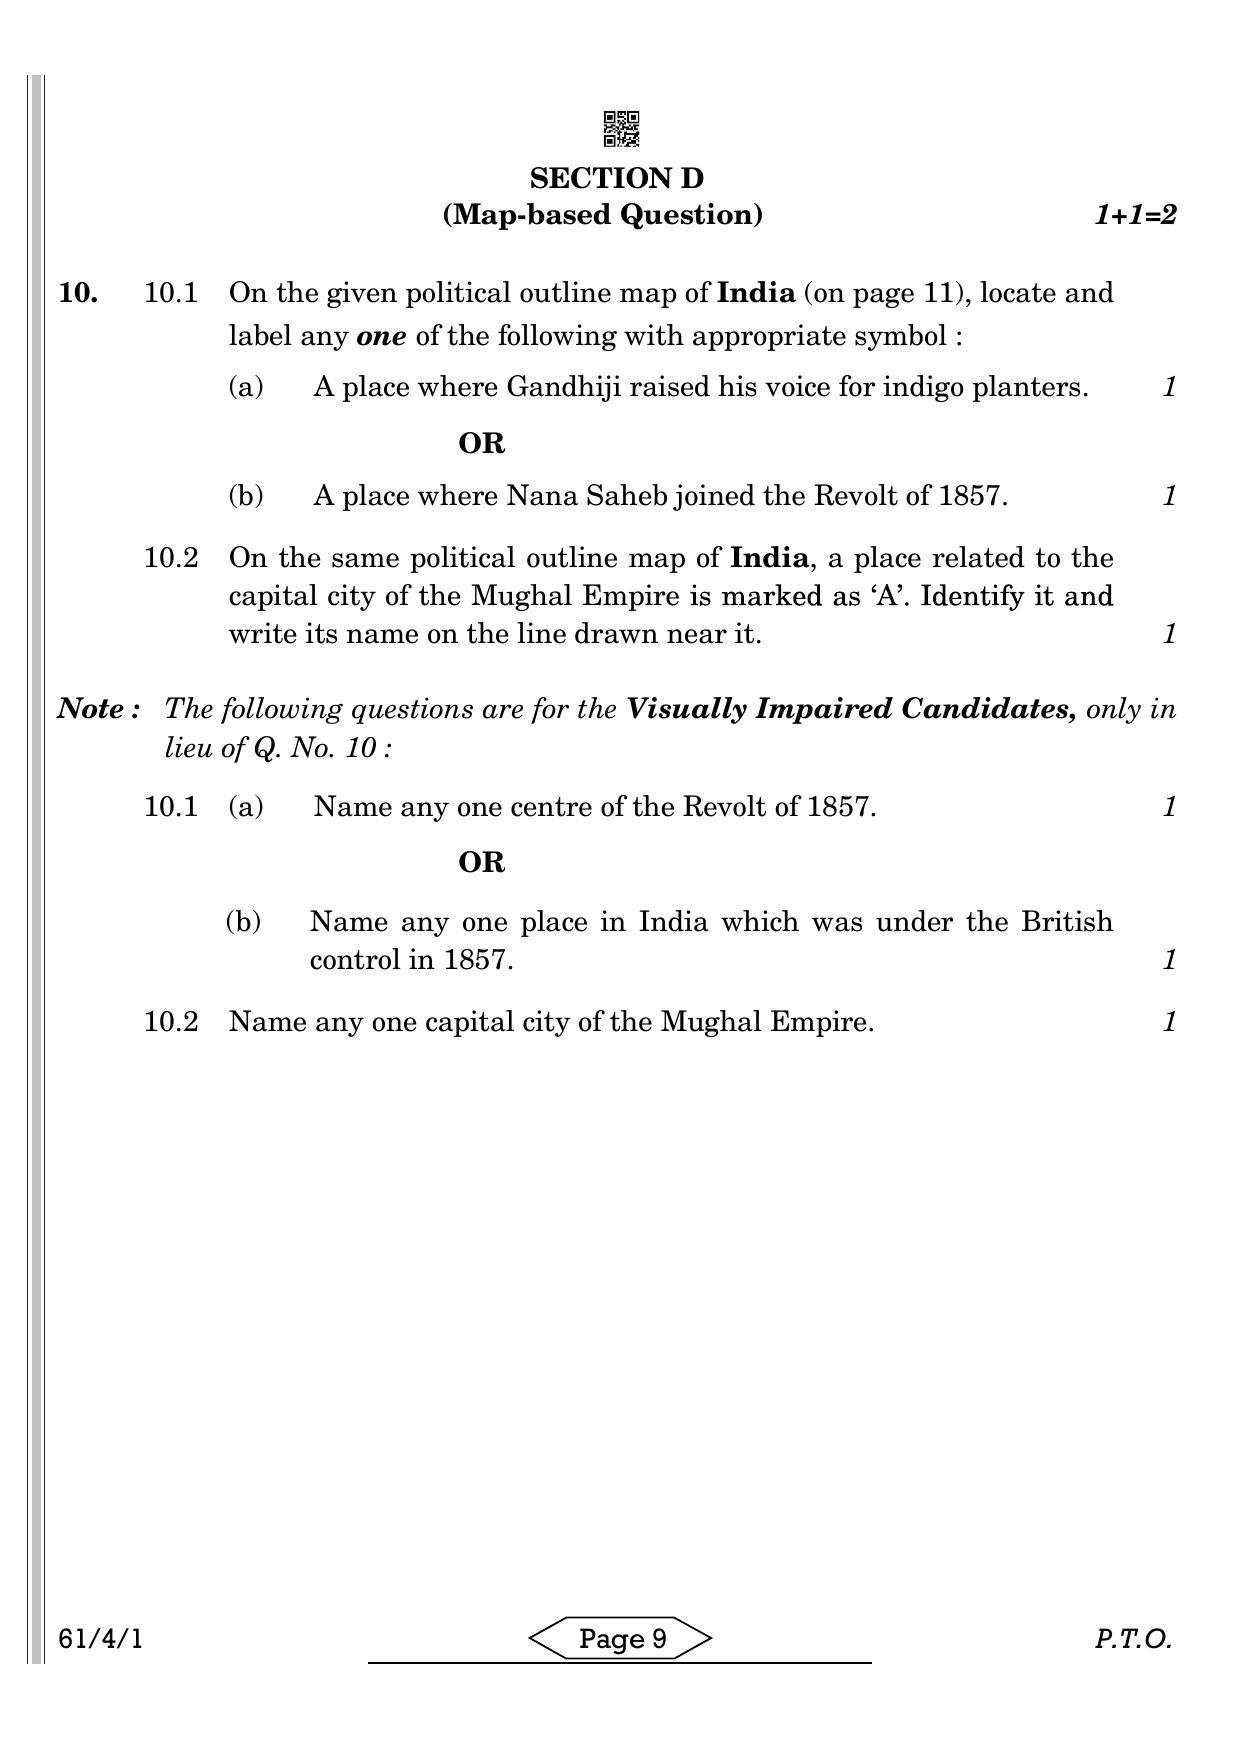 CBSE Class 12 61-4-1 History 2022 Question Paper - Page 9